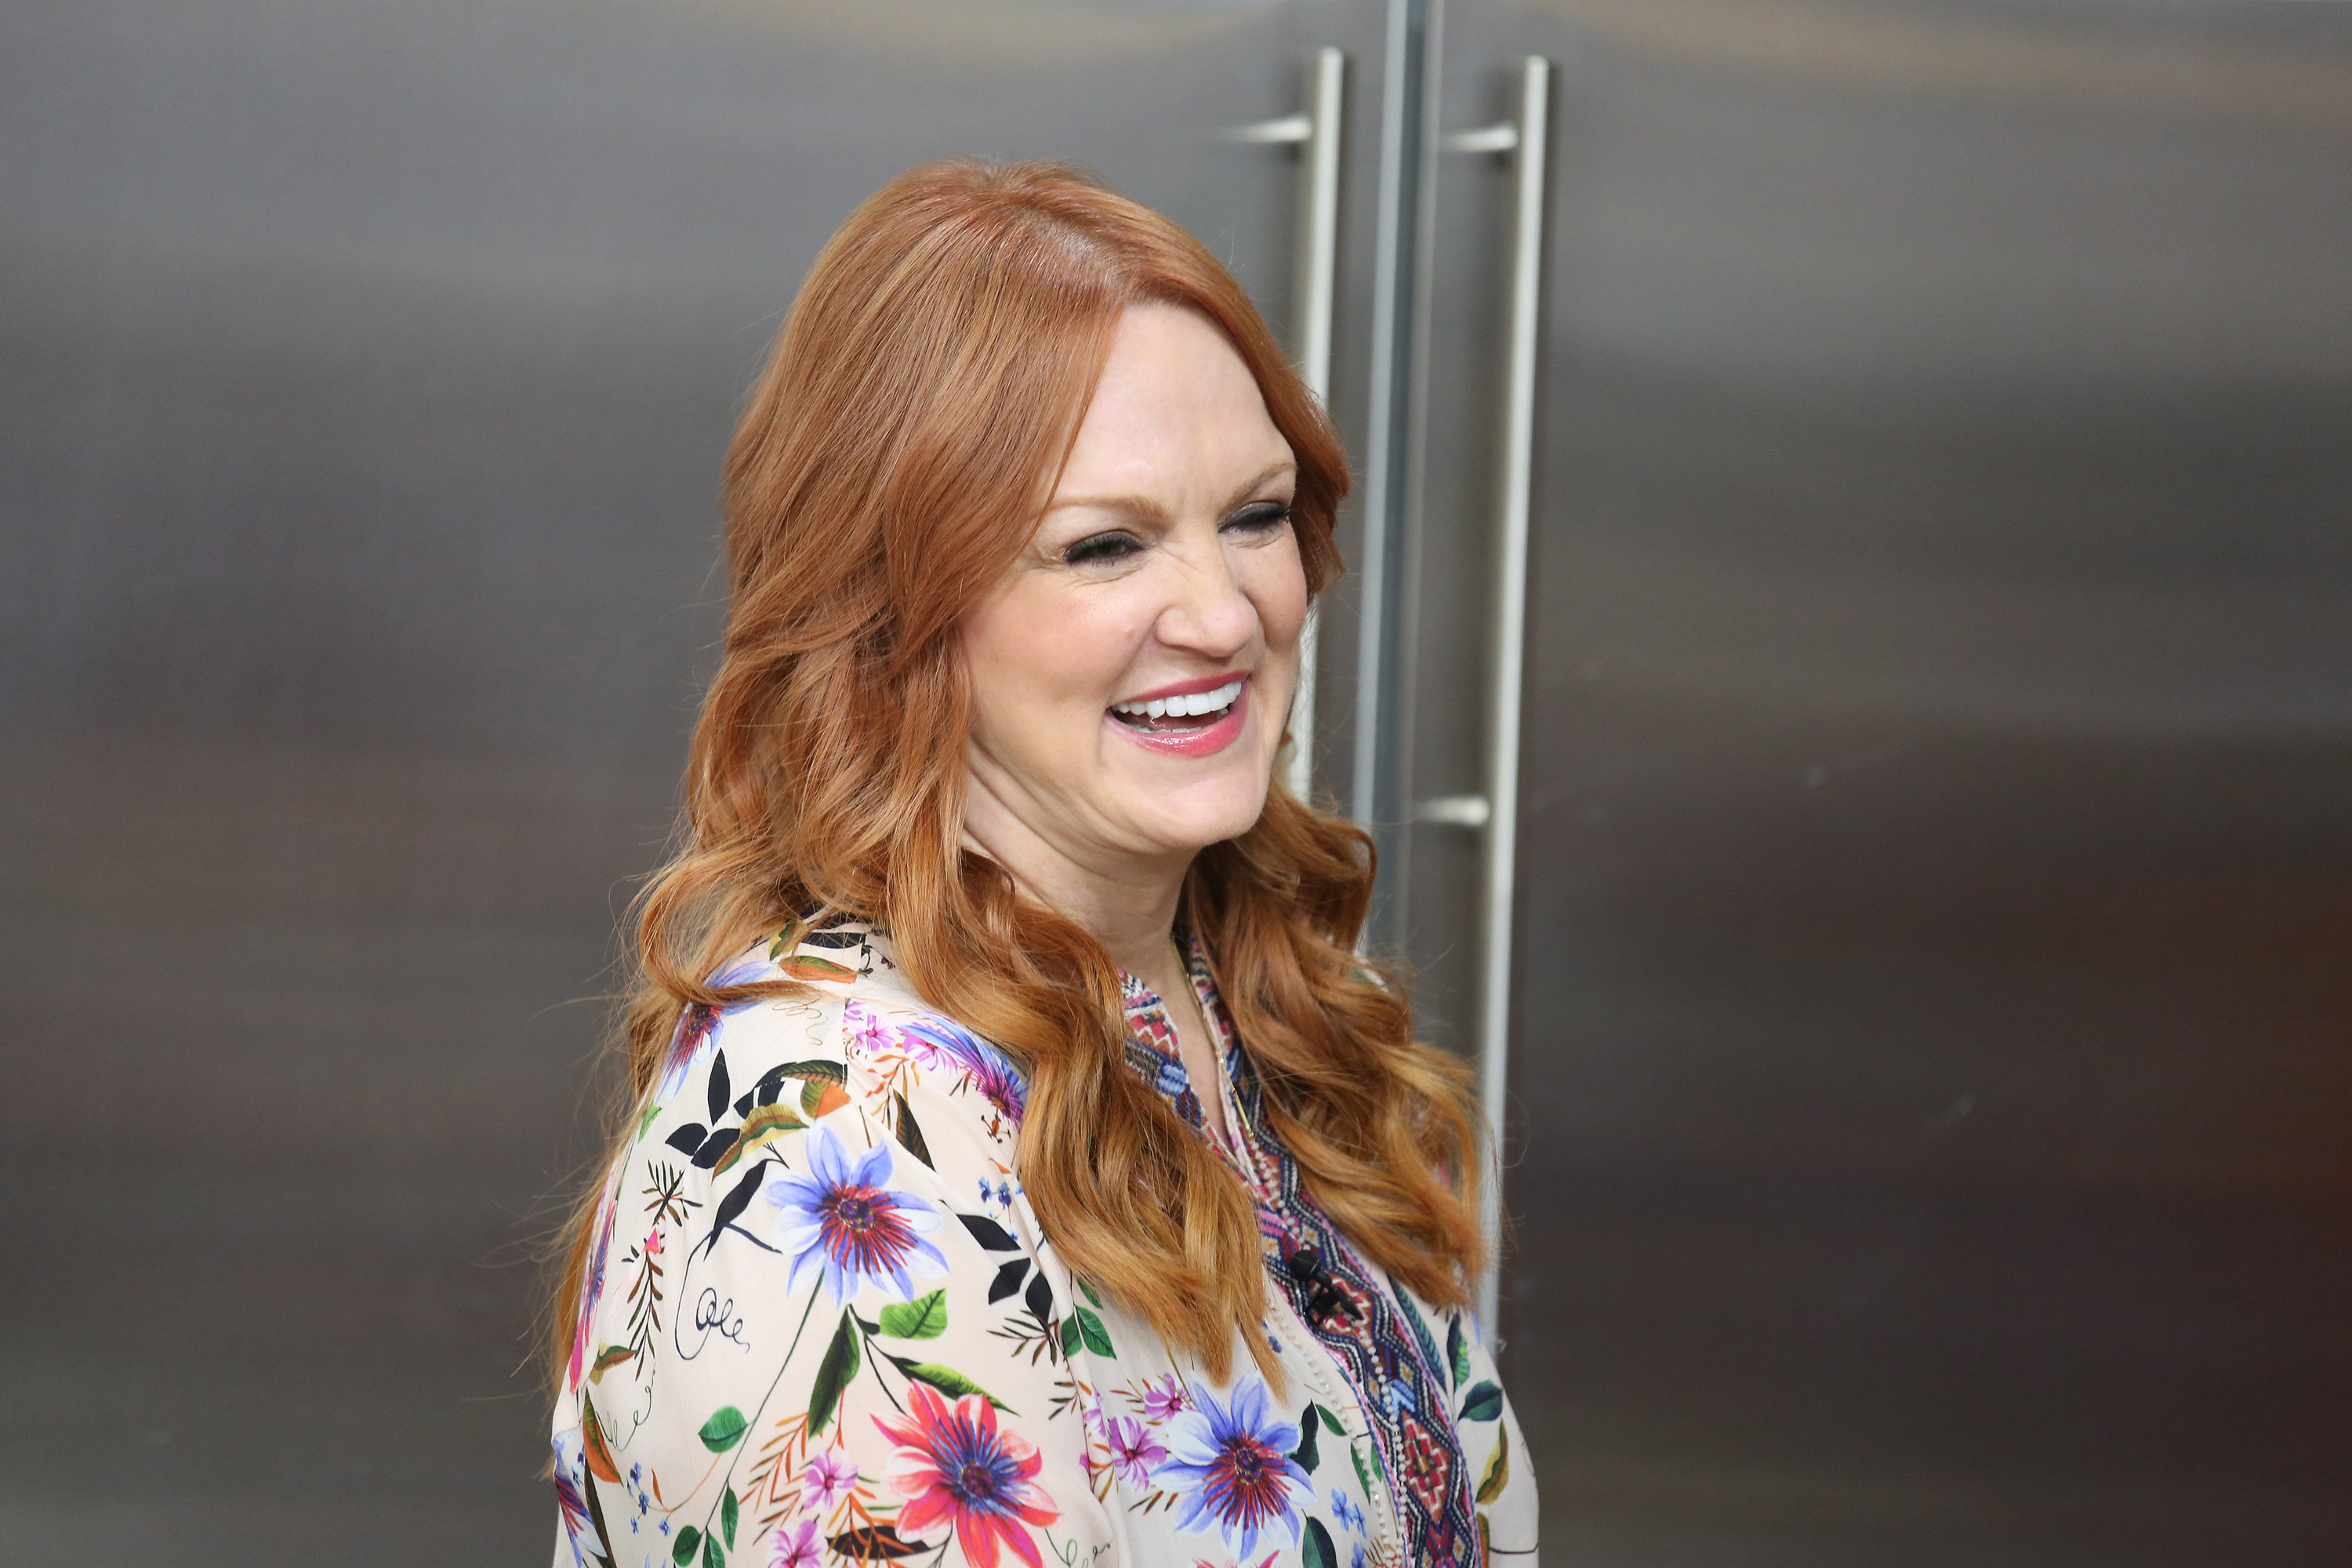 'The Pioneer Woman' star Ree Drummond smiles wearing a bright colored top